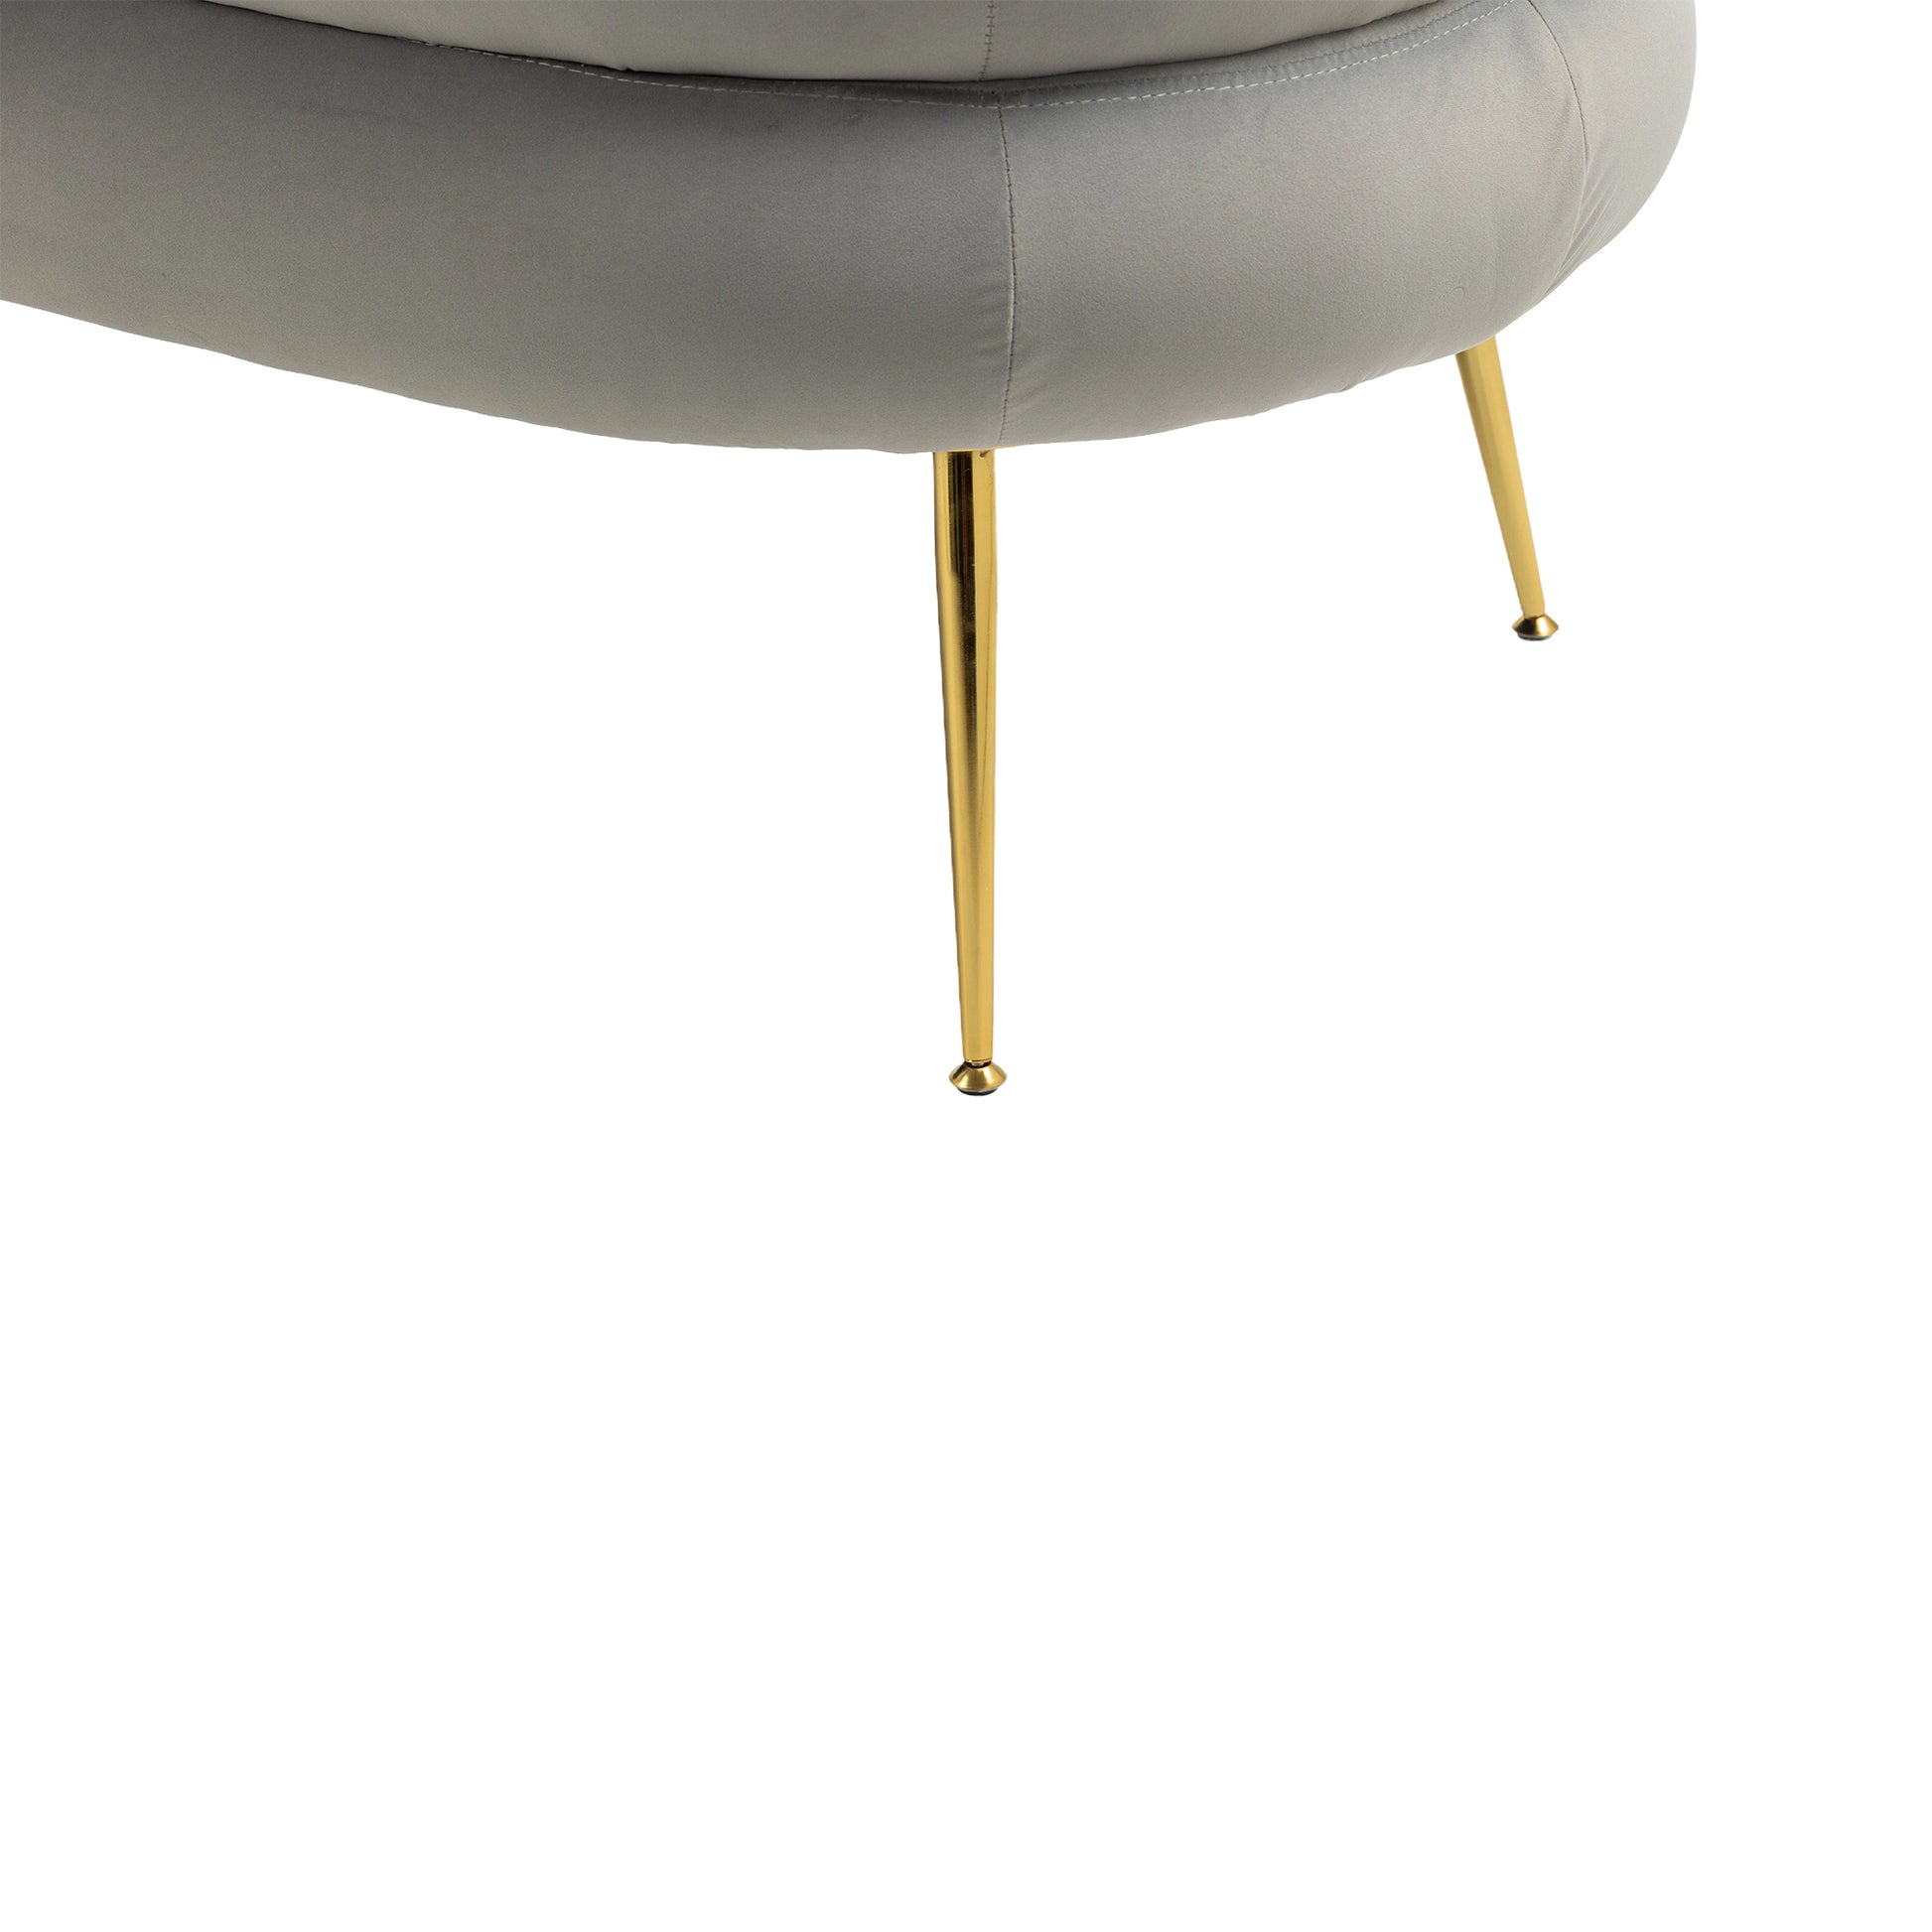 COOLMORE Accent Chair ,leisure chair with Golden feet - Enova Luxe Home Store